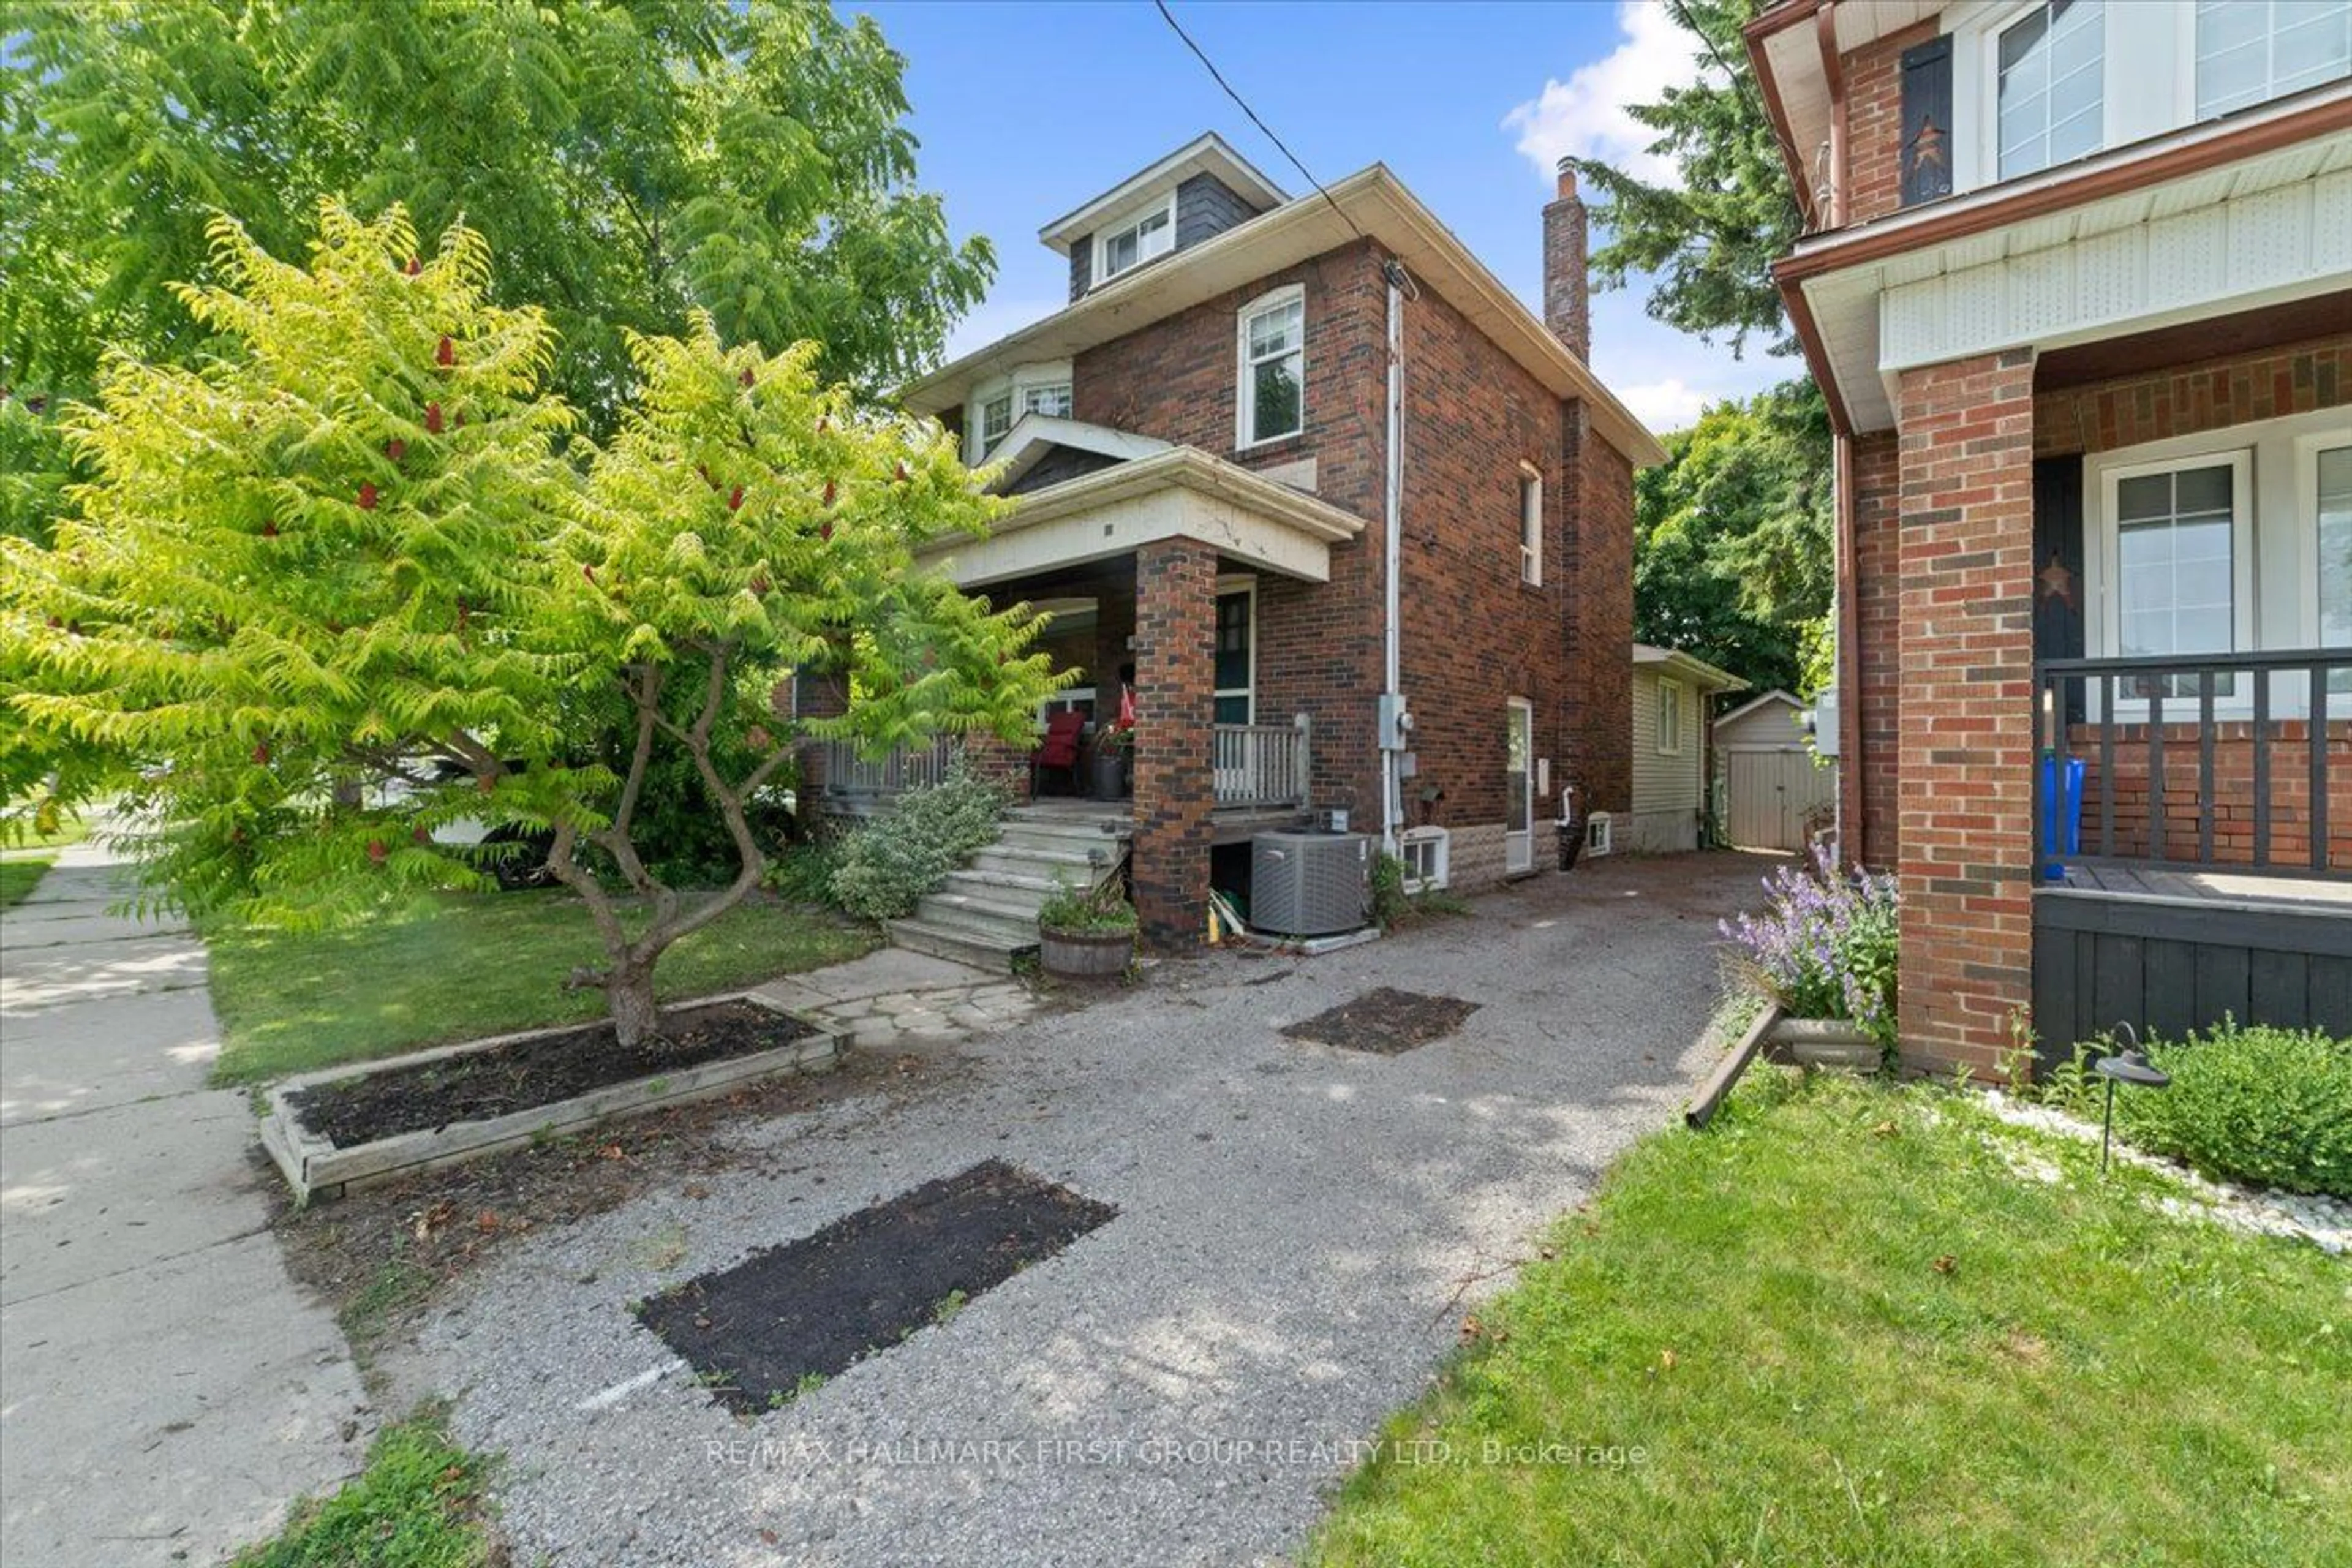 Home with brick exterior material for 54 Arlington Ave, Oshawa Ontario L1G 2N4